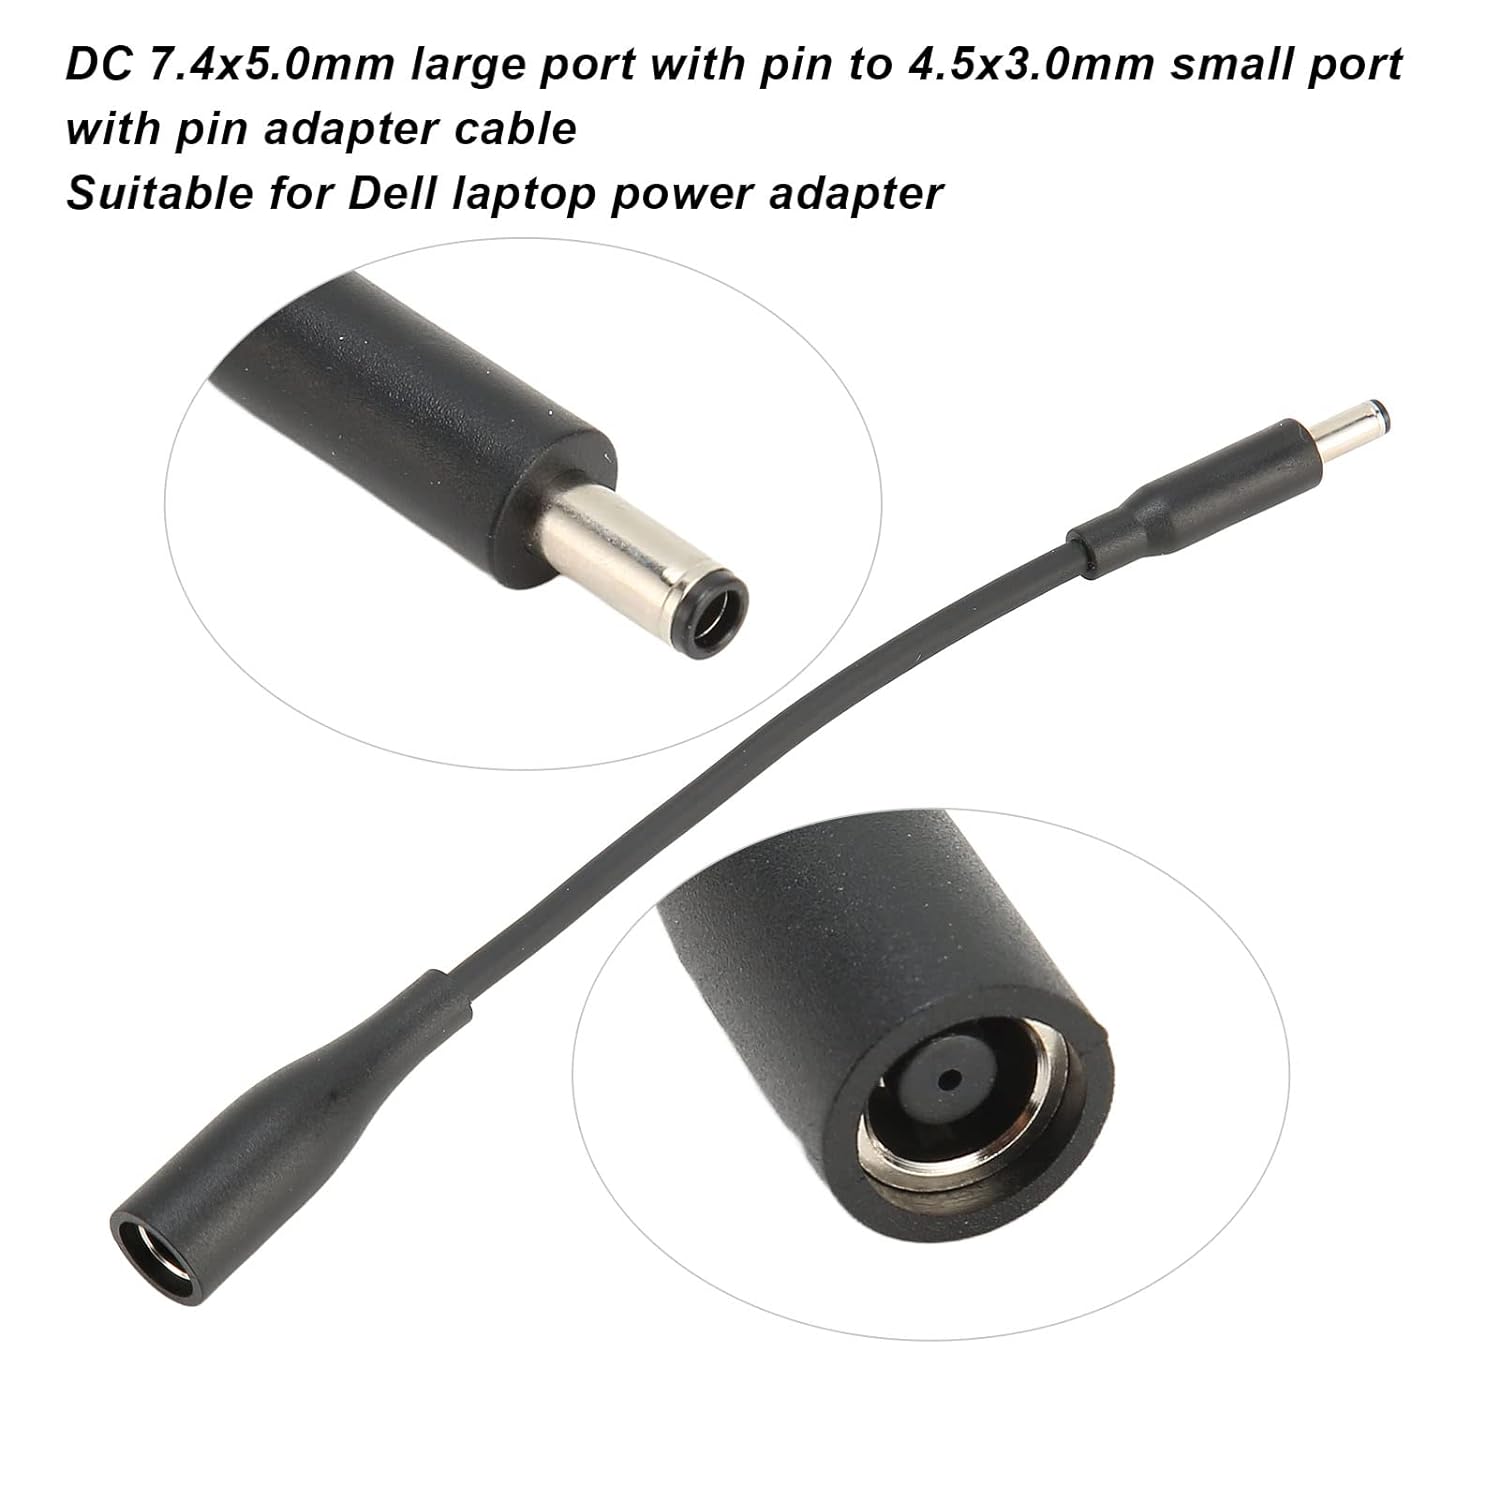 HF-D7450M4535F-A: Tip Adapter Converter Cable DC 7.4x5.0mm Male to 4.5x3.0mm Female for Dell Laptop Power Supply, Plug and Play